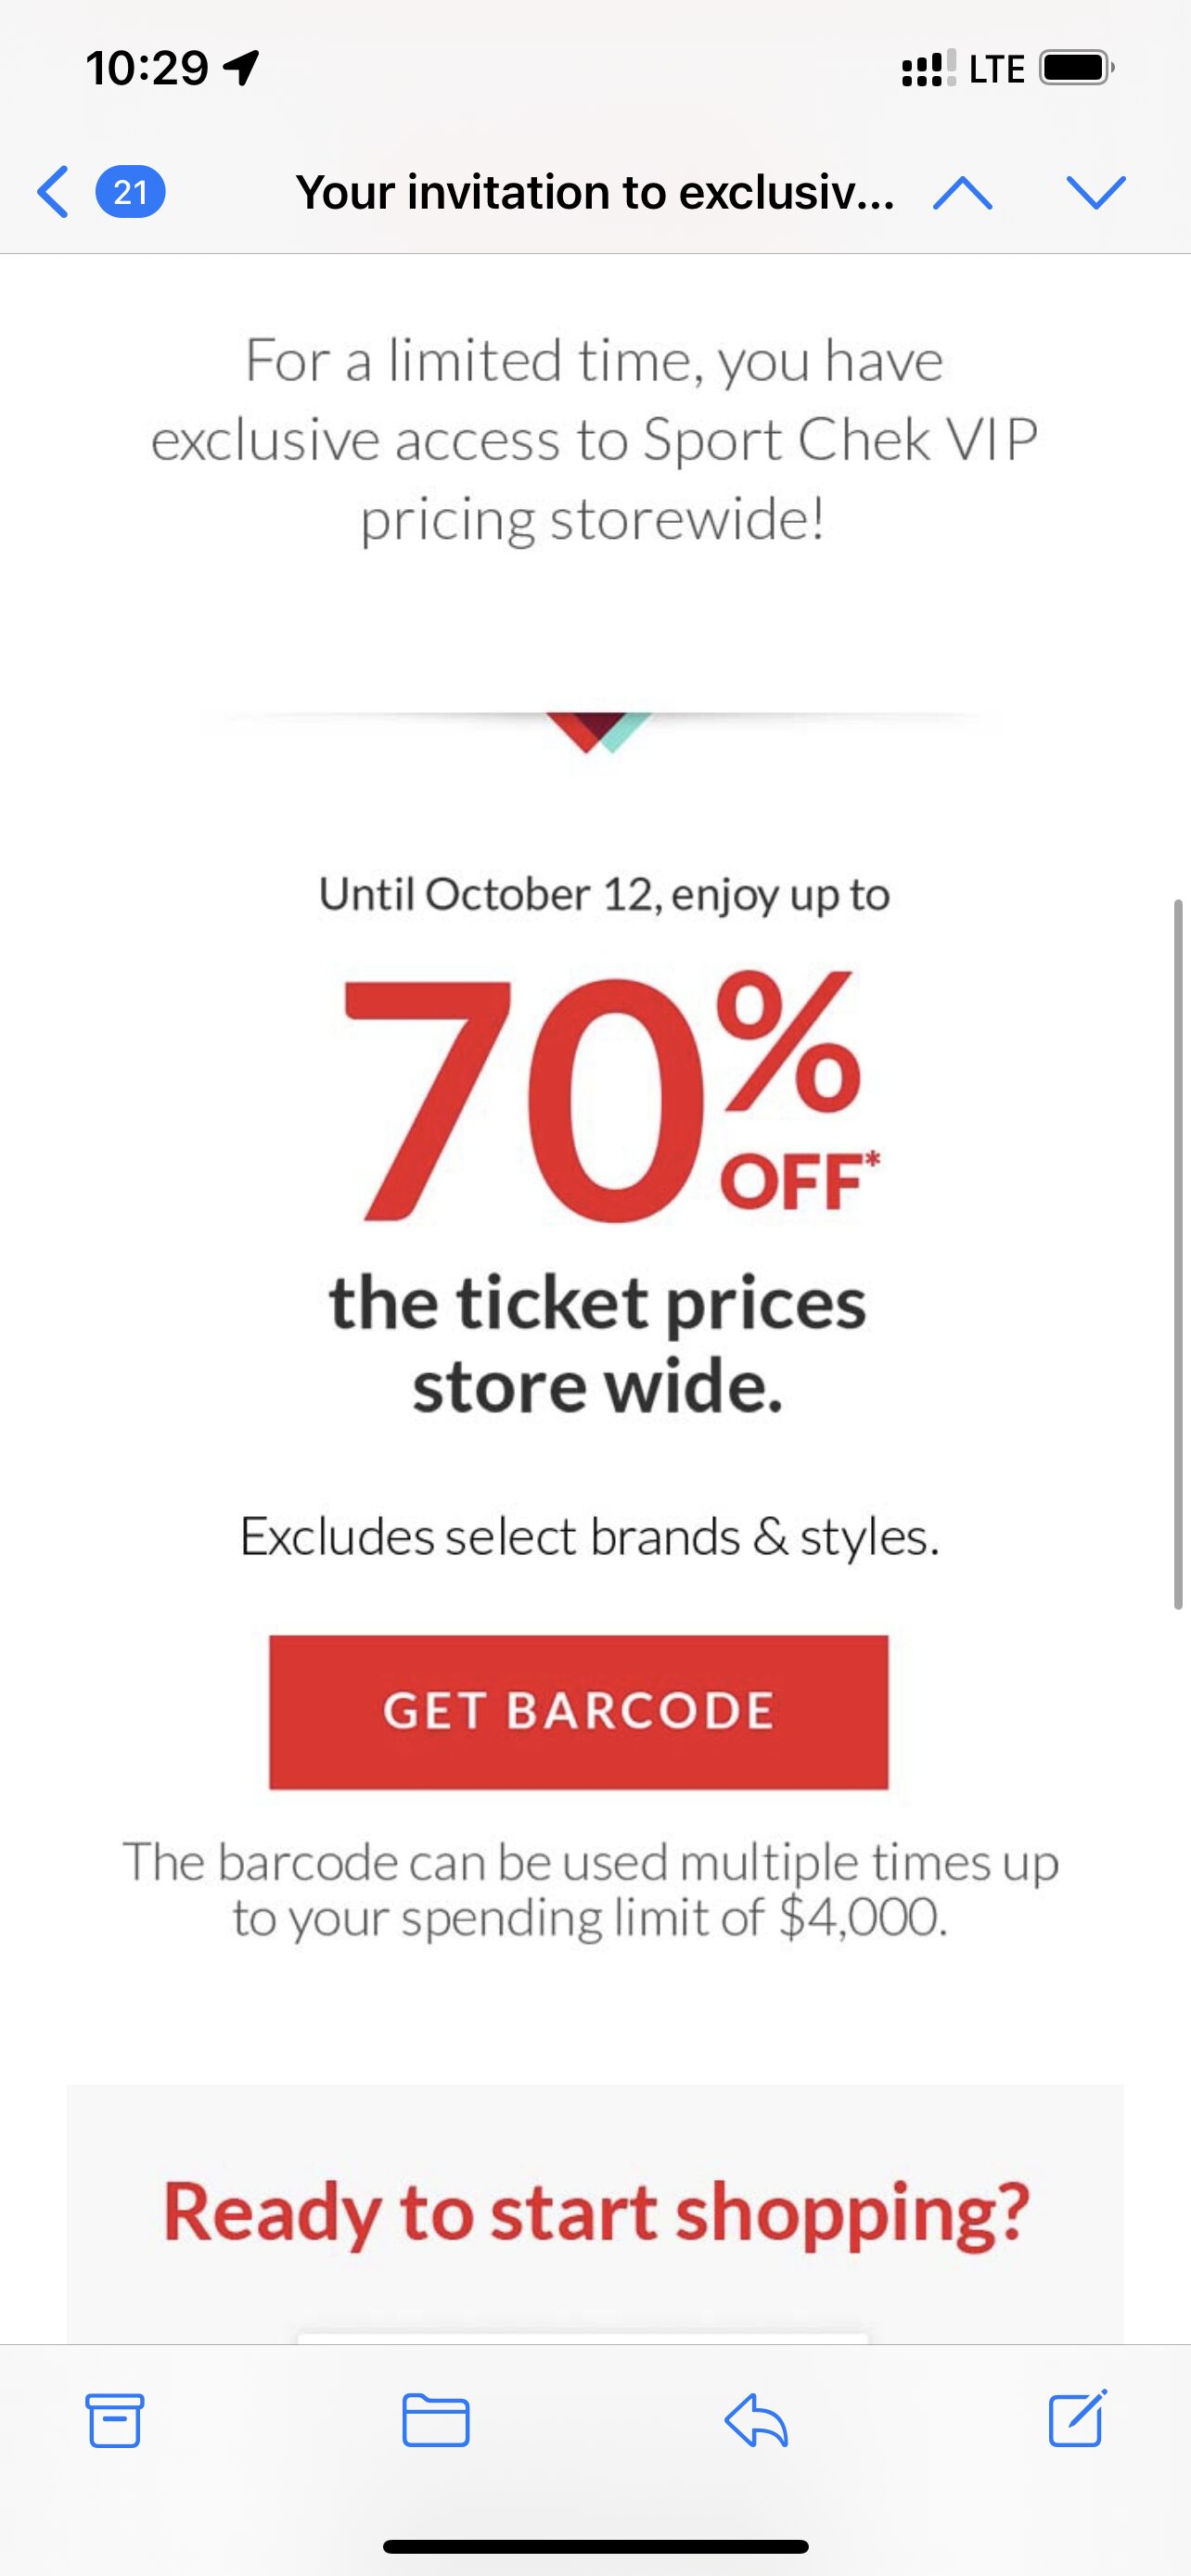 Sport Chek] Sport Chek up to 70% off VIP pricing is back with Triangle  Rewards & Mastercard (In-store only) NO CODE REQUESTS - RedFlagDeals.com  Forums